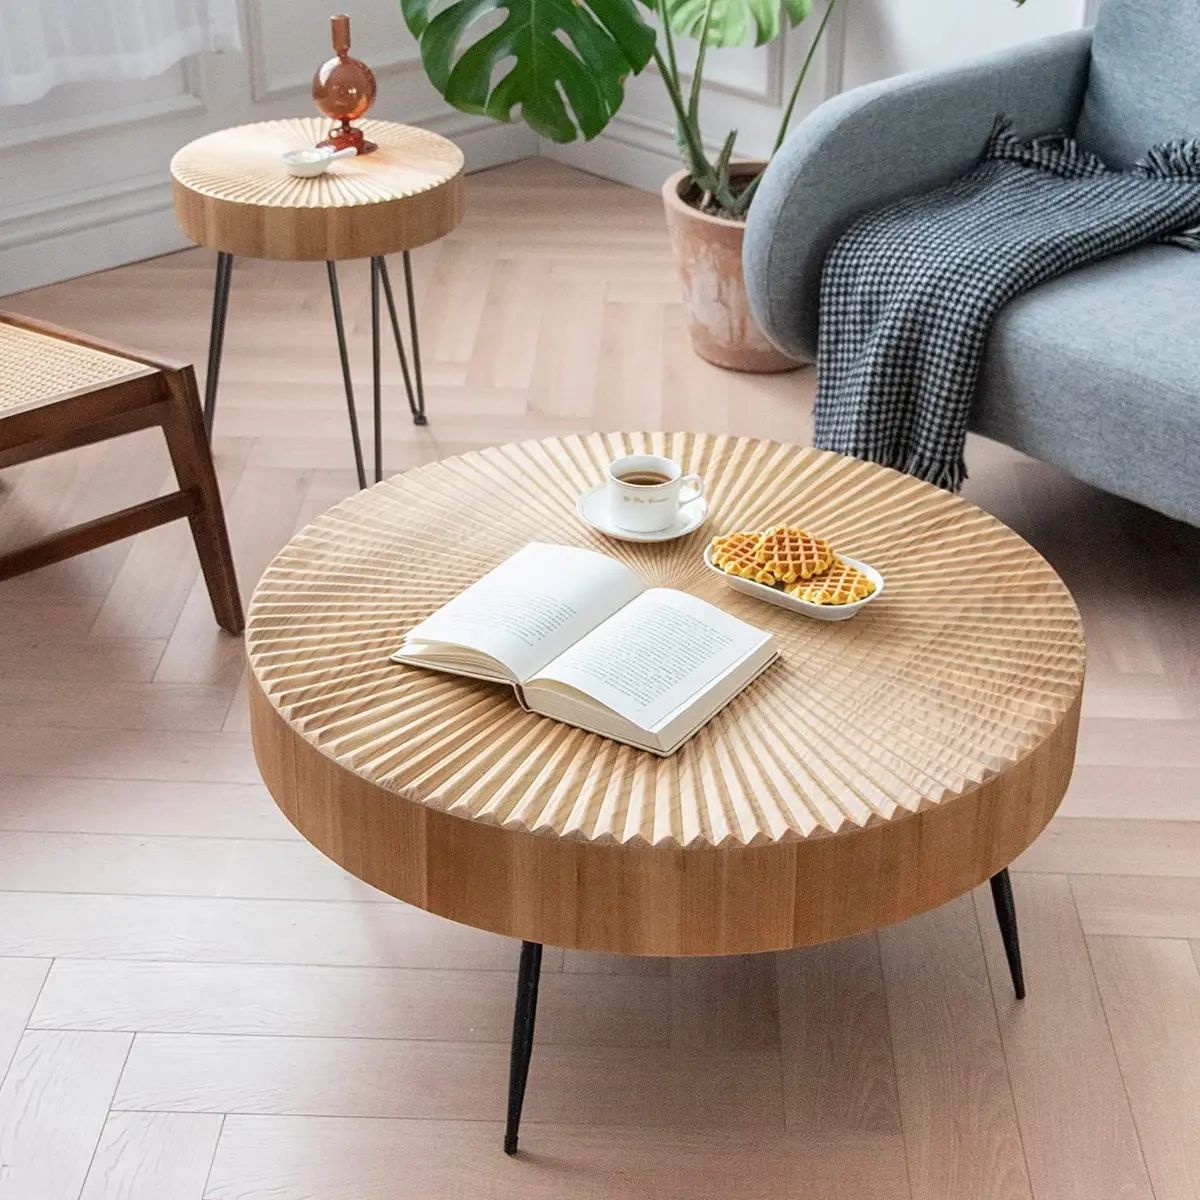 2 Piece Modern Farmhouse Living Room Coffee Table Set, Nesting Table Round  With | Ebay Within Modern Farmhouse Coffee Table Sets (Photo 2 of 15)